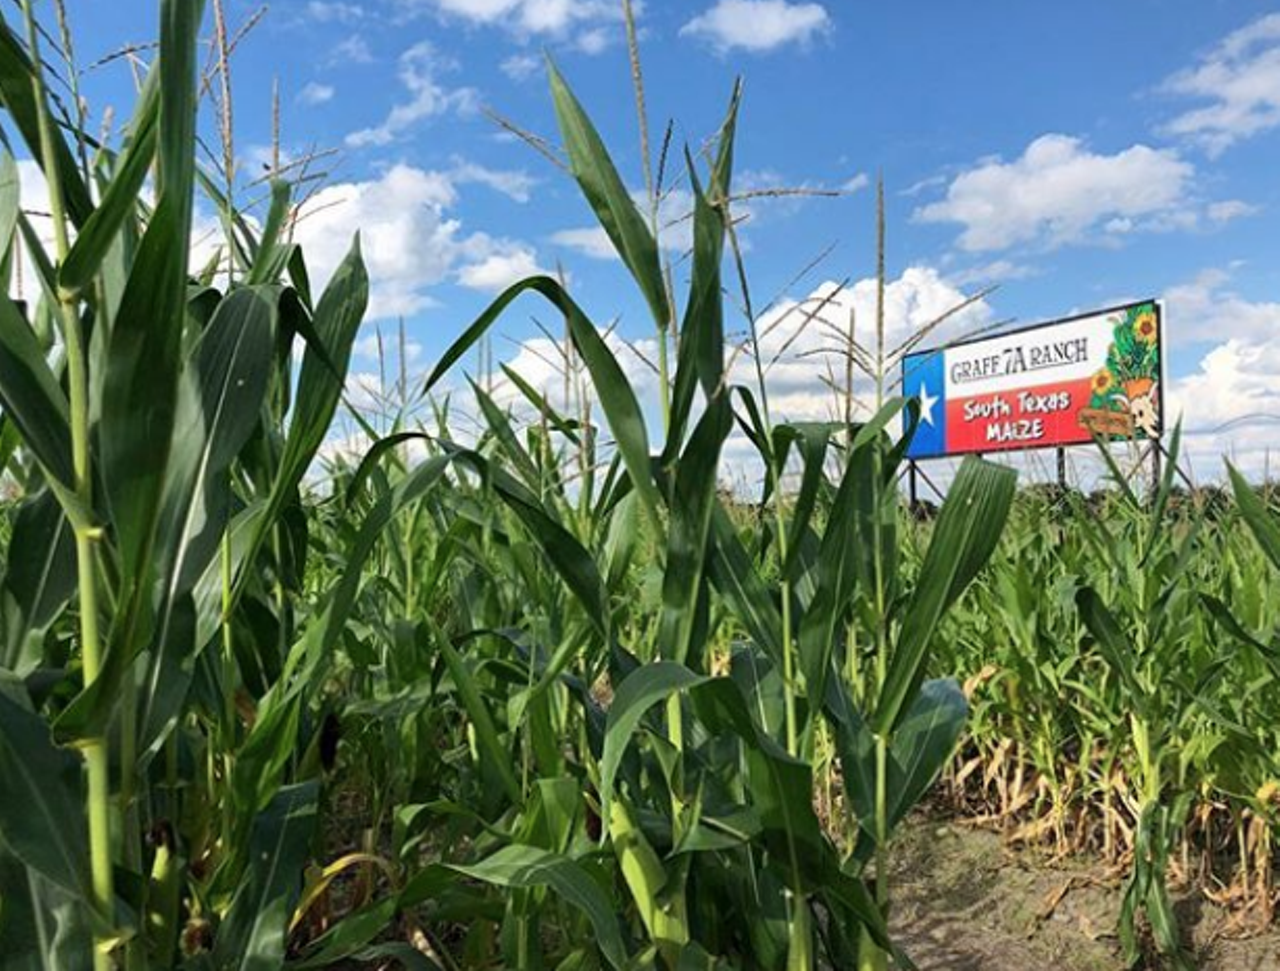 Get lost in a corn maze
Start here, and good luck.
Whether you’re good at solving puzzles or not, you and your date will have a blast figuring your way out of the maze. And that’s only half of the fun! Most of these mazes have other activities on-site, so you can have a full day of fall fun.
Photo via Instagram / michellearaiza_